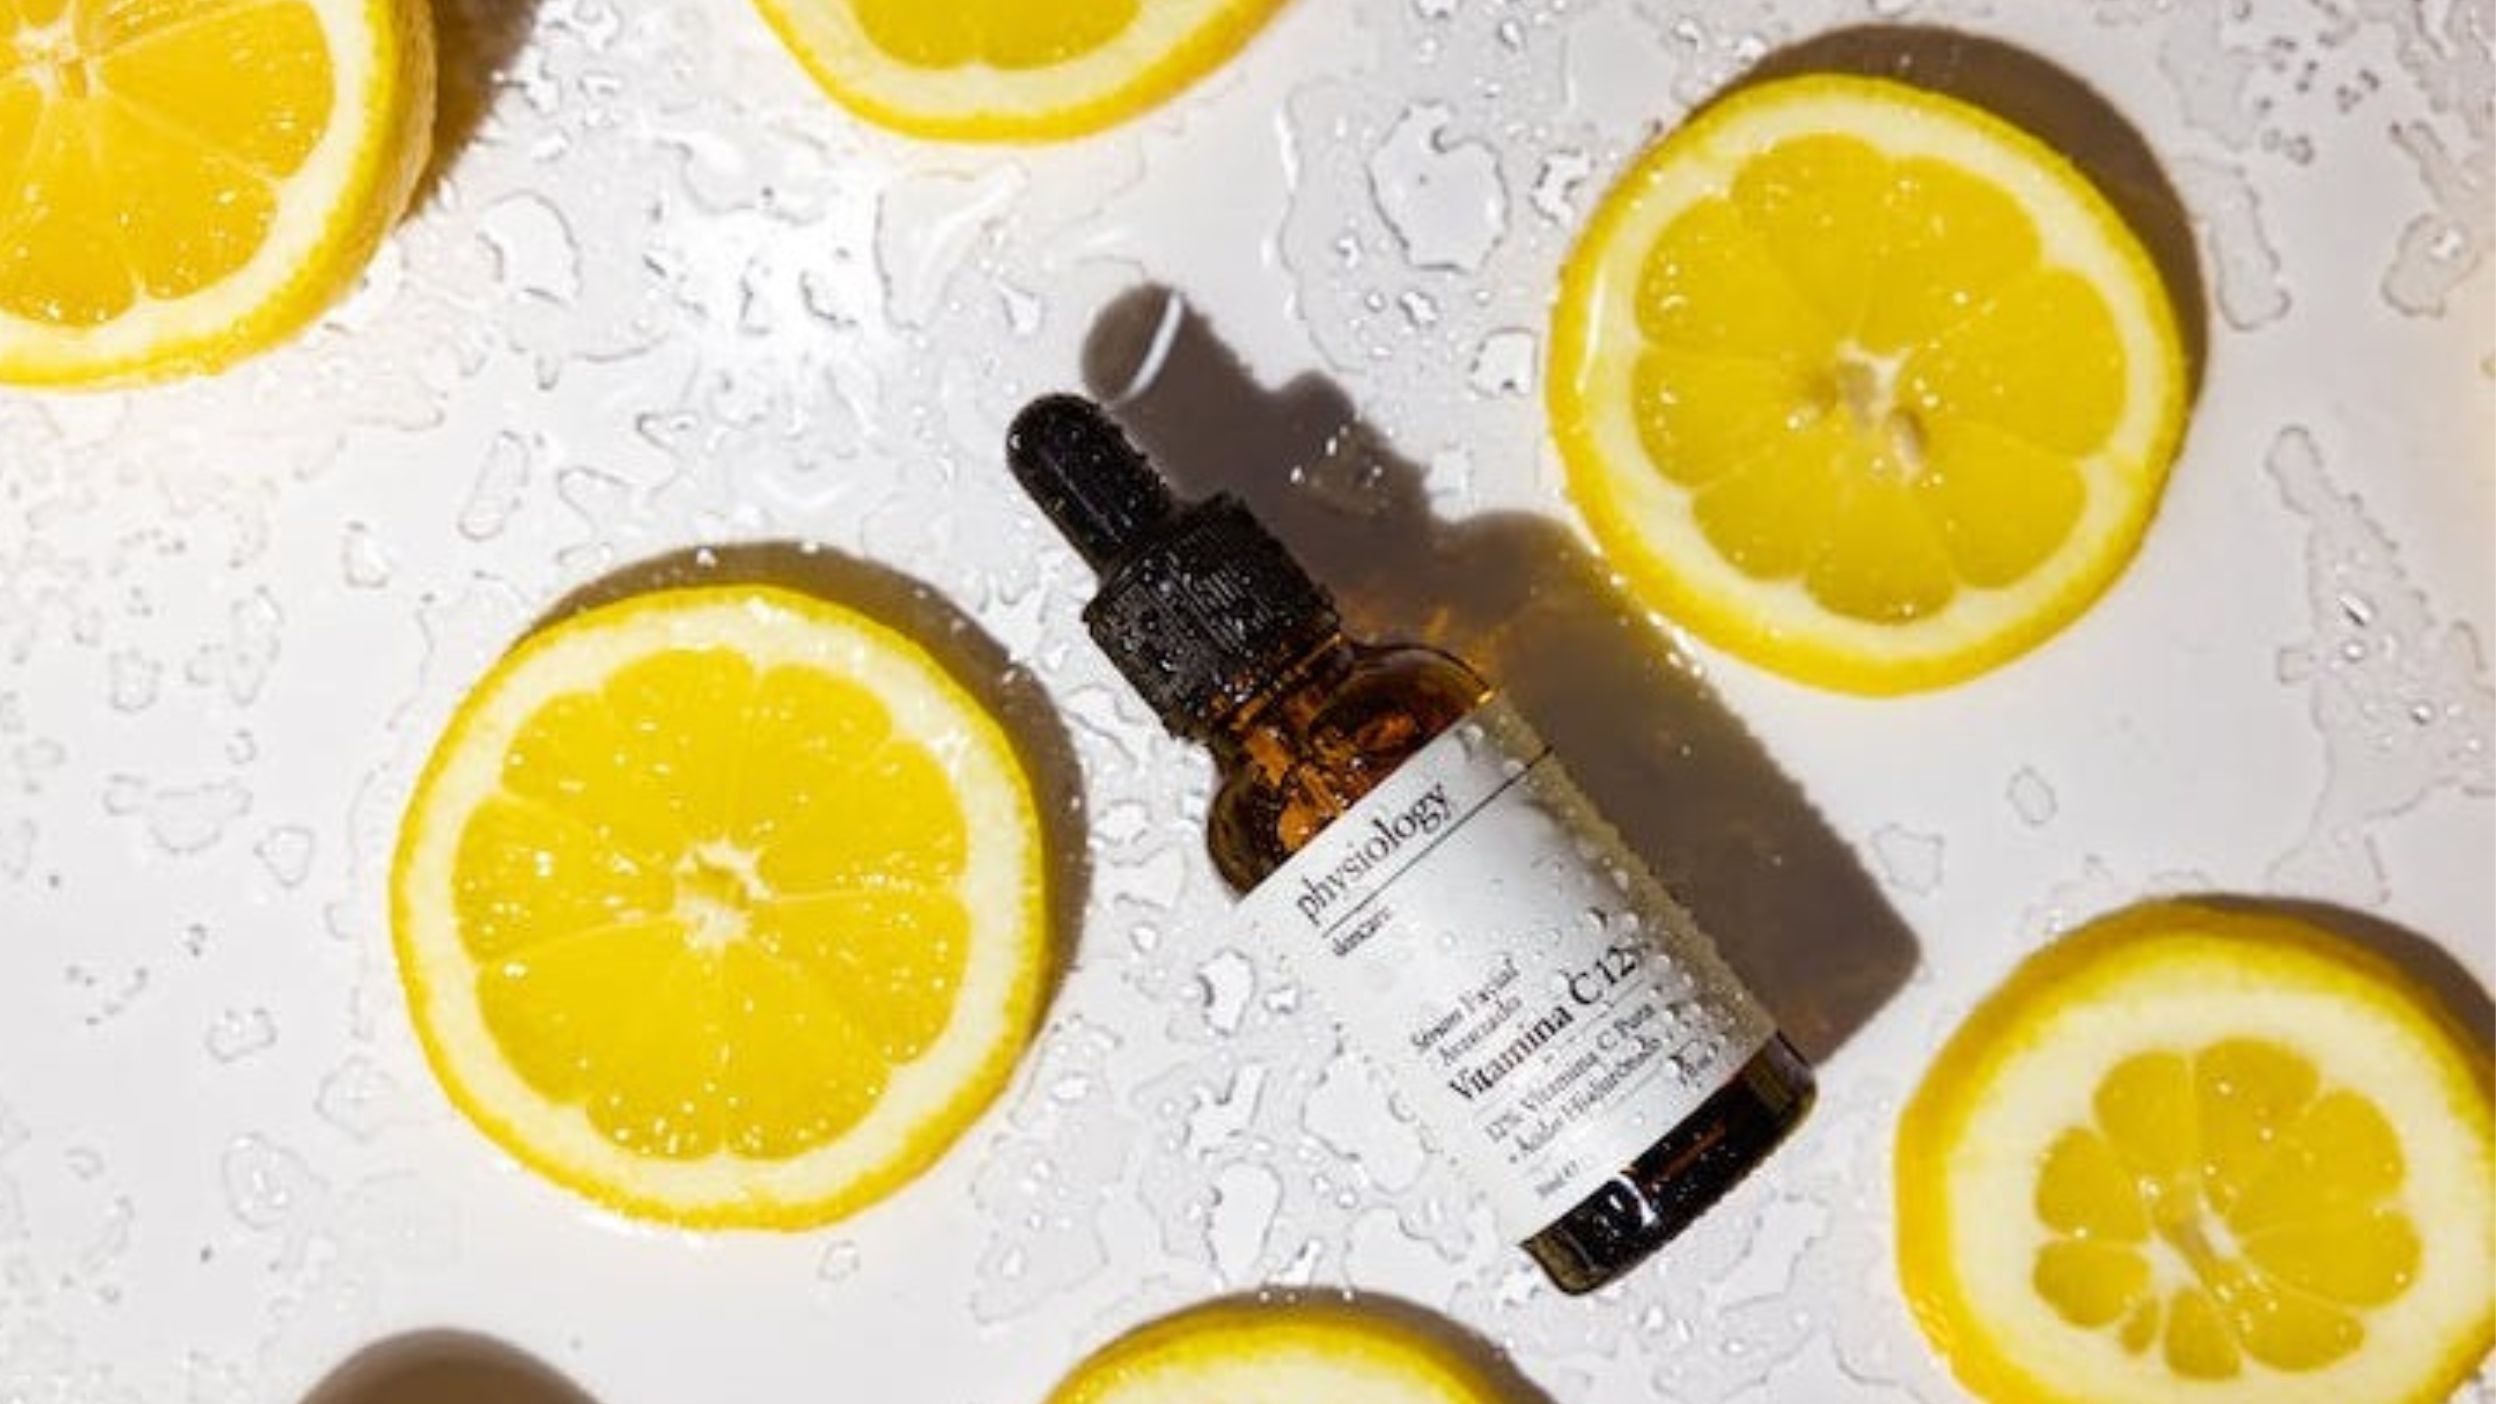 Power of C: Infused in a vital serum, vitamin C can help with all manner of skin issues